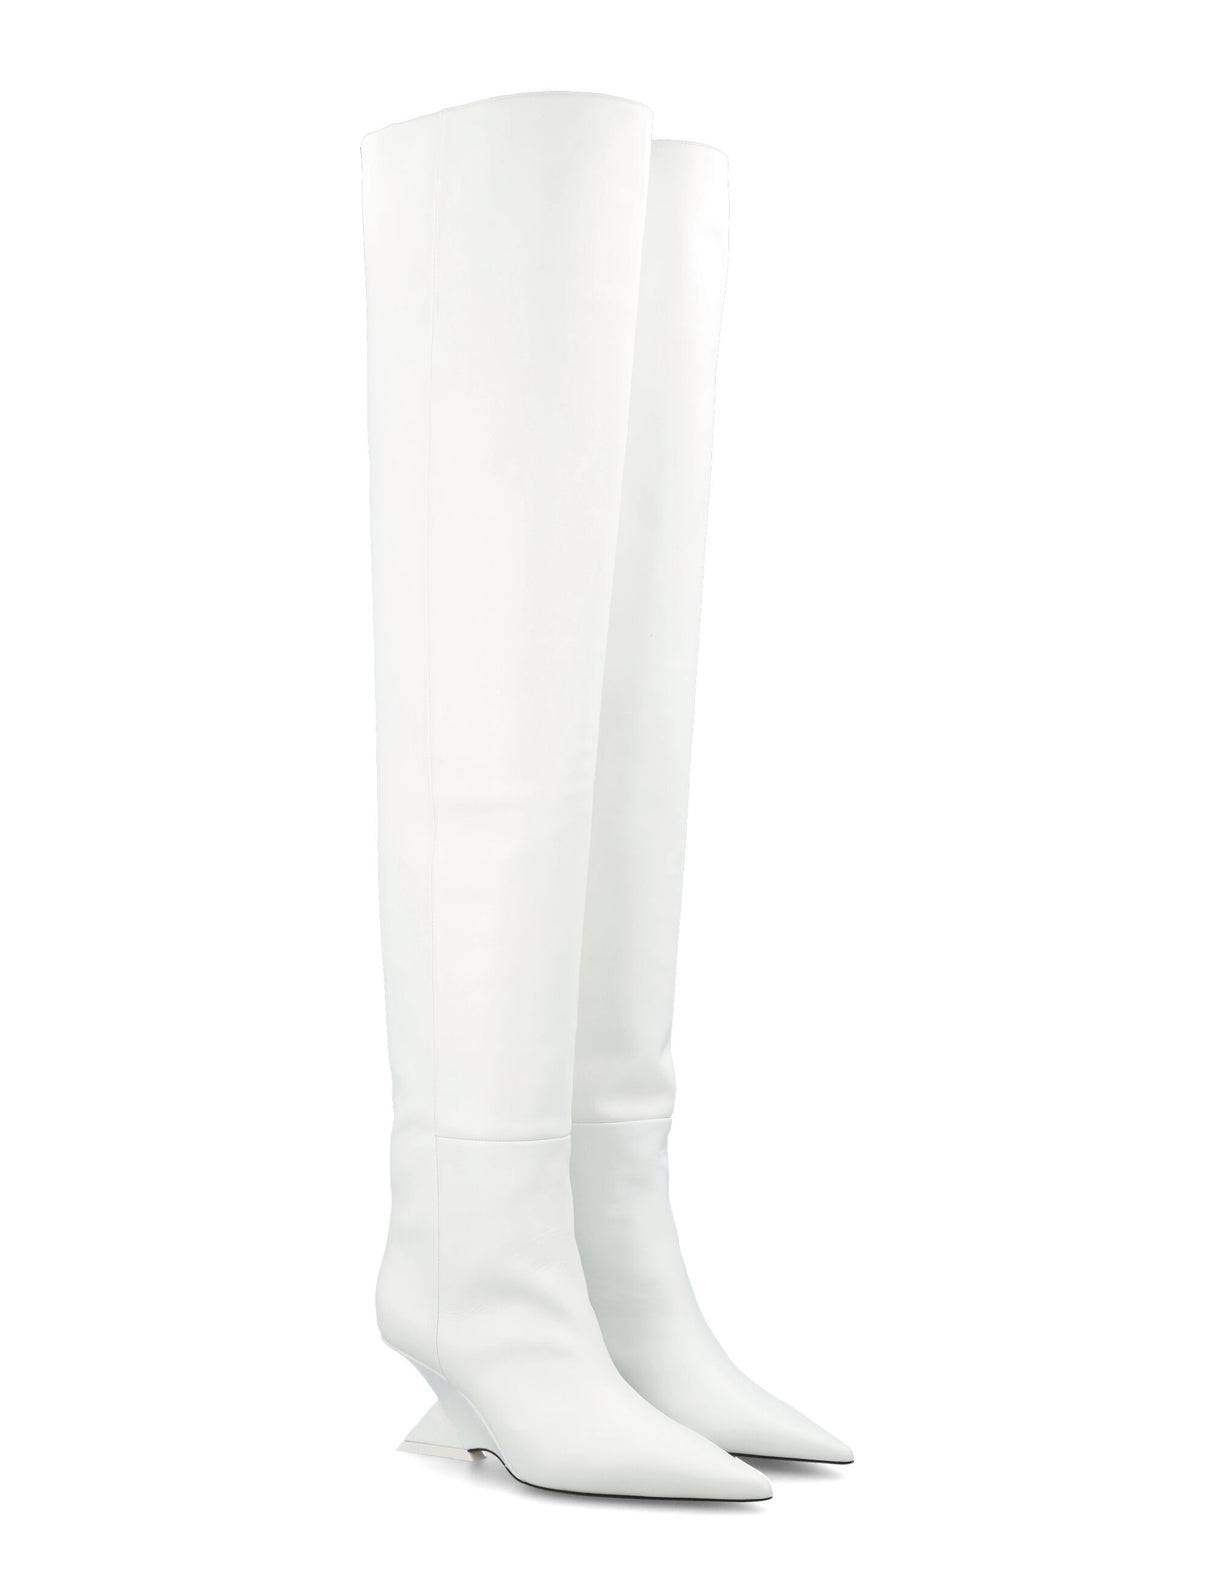 White Leather Over-Knee Boots with Pyramid Wedge for Women